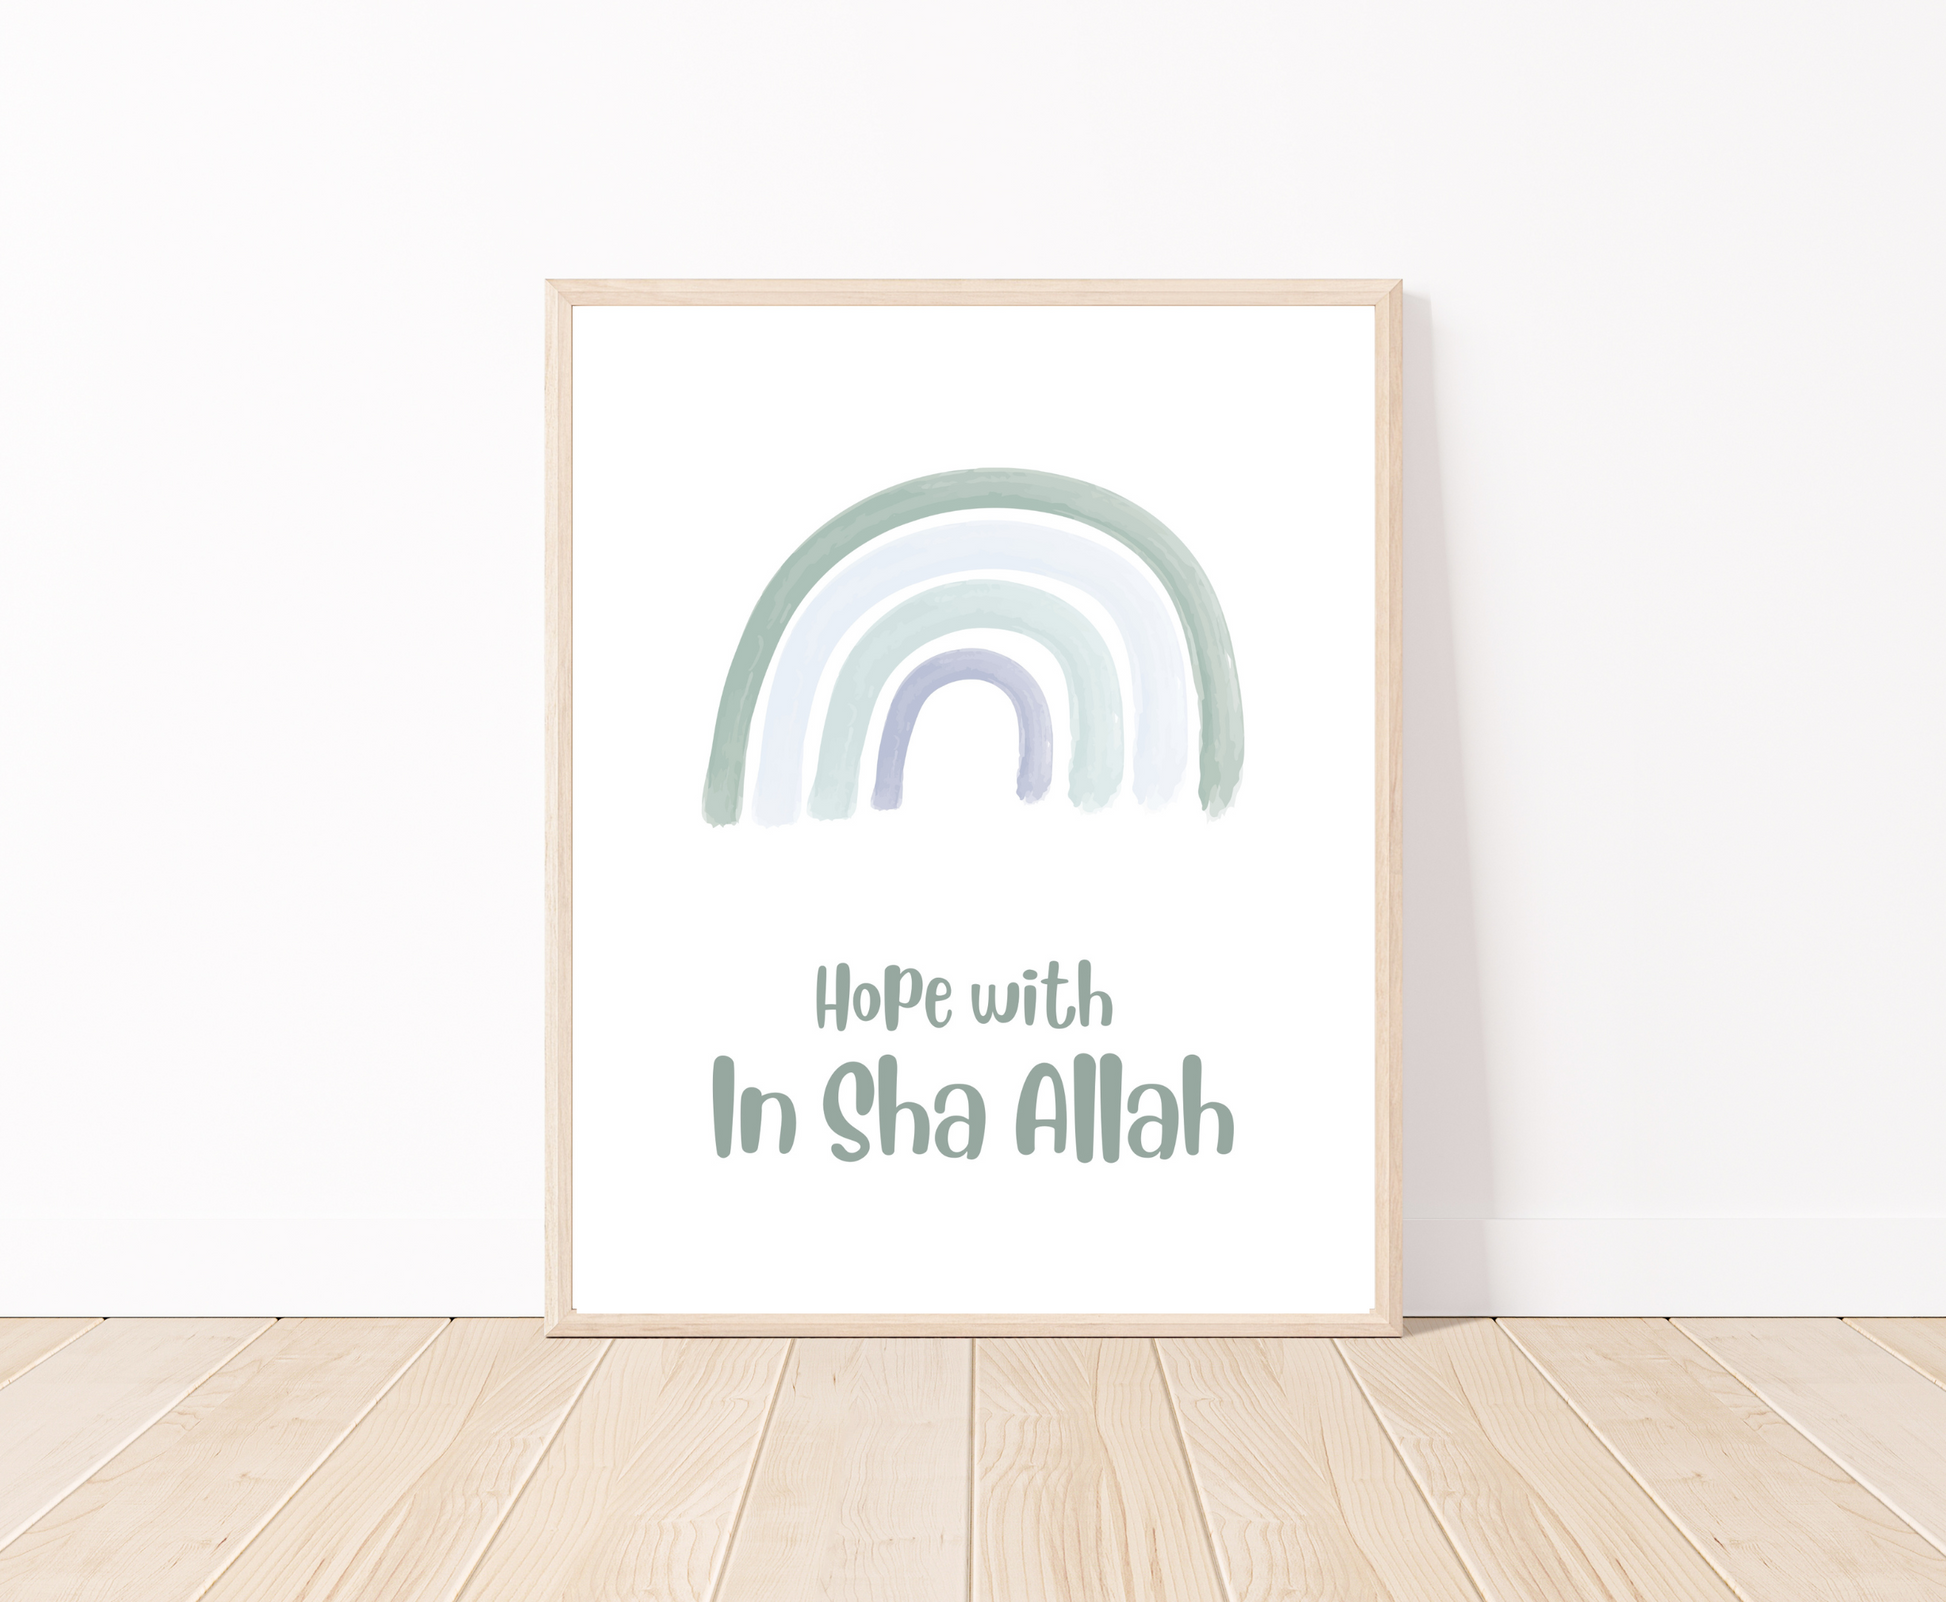 A digital poster that is placed on a white wall and parquet flooring shows a baby green rainbow with “Hope with In Sha Allah” written just below it.